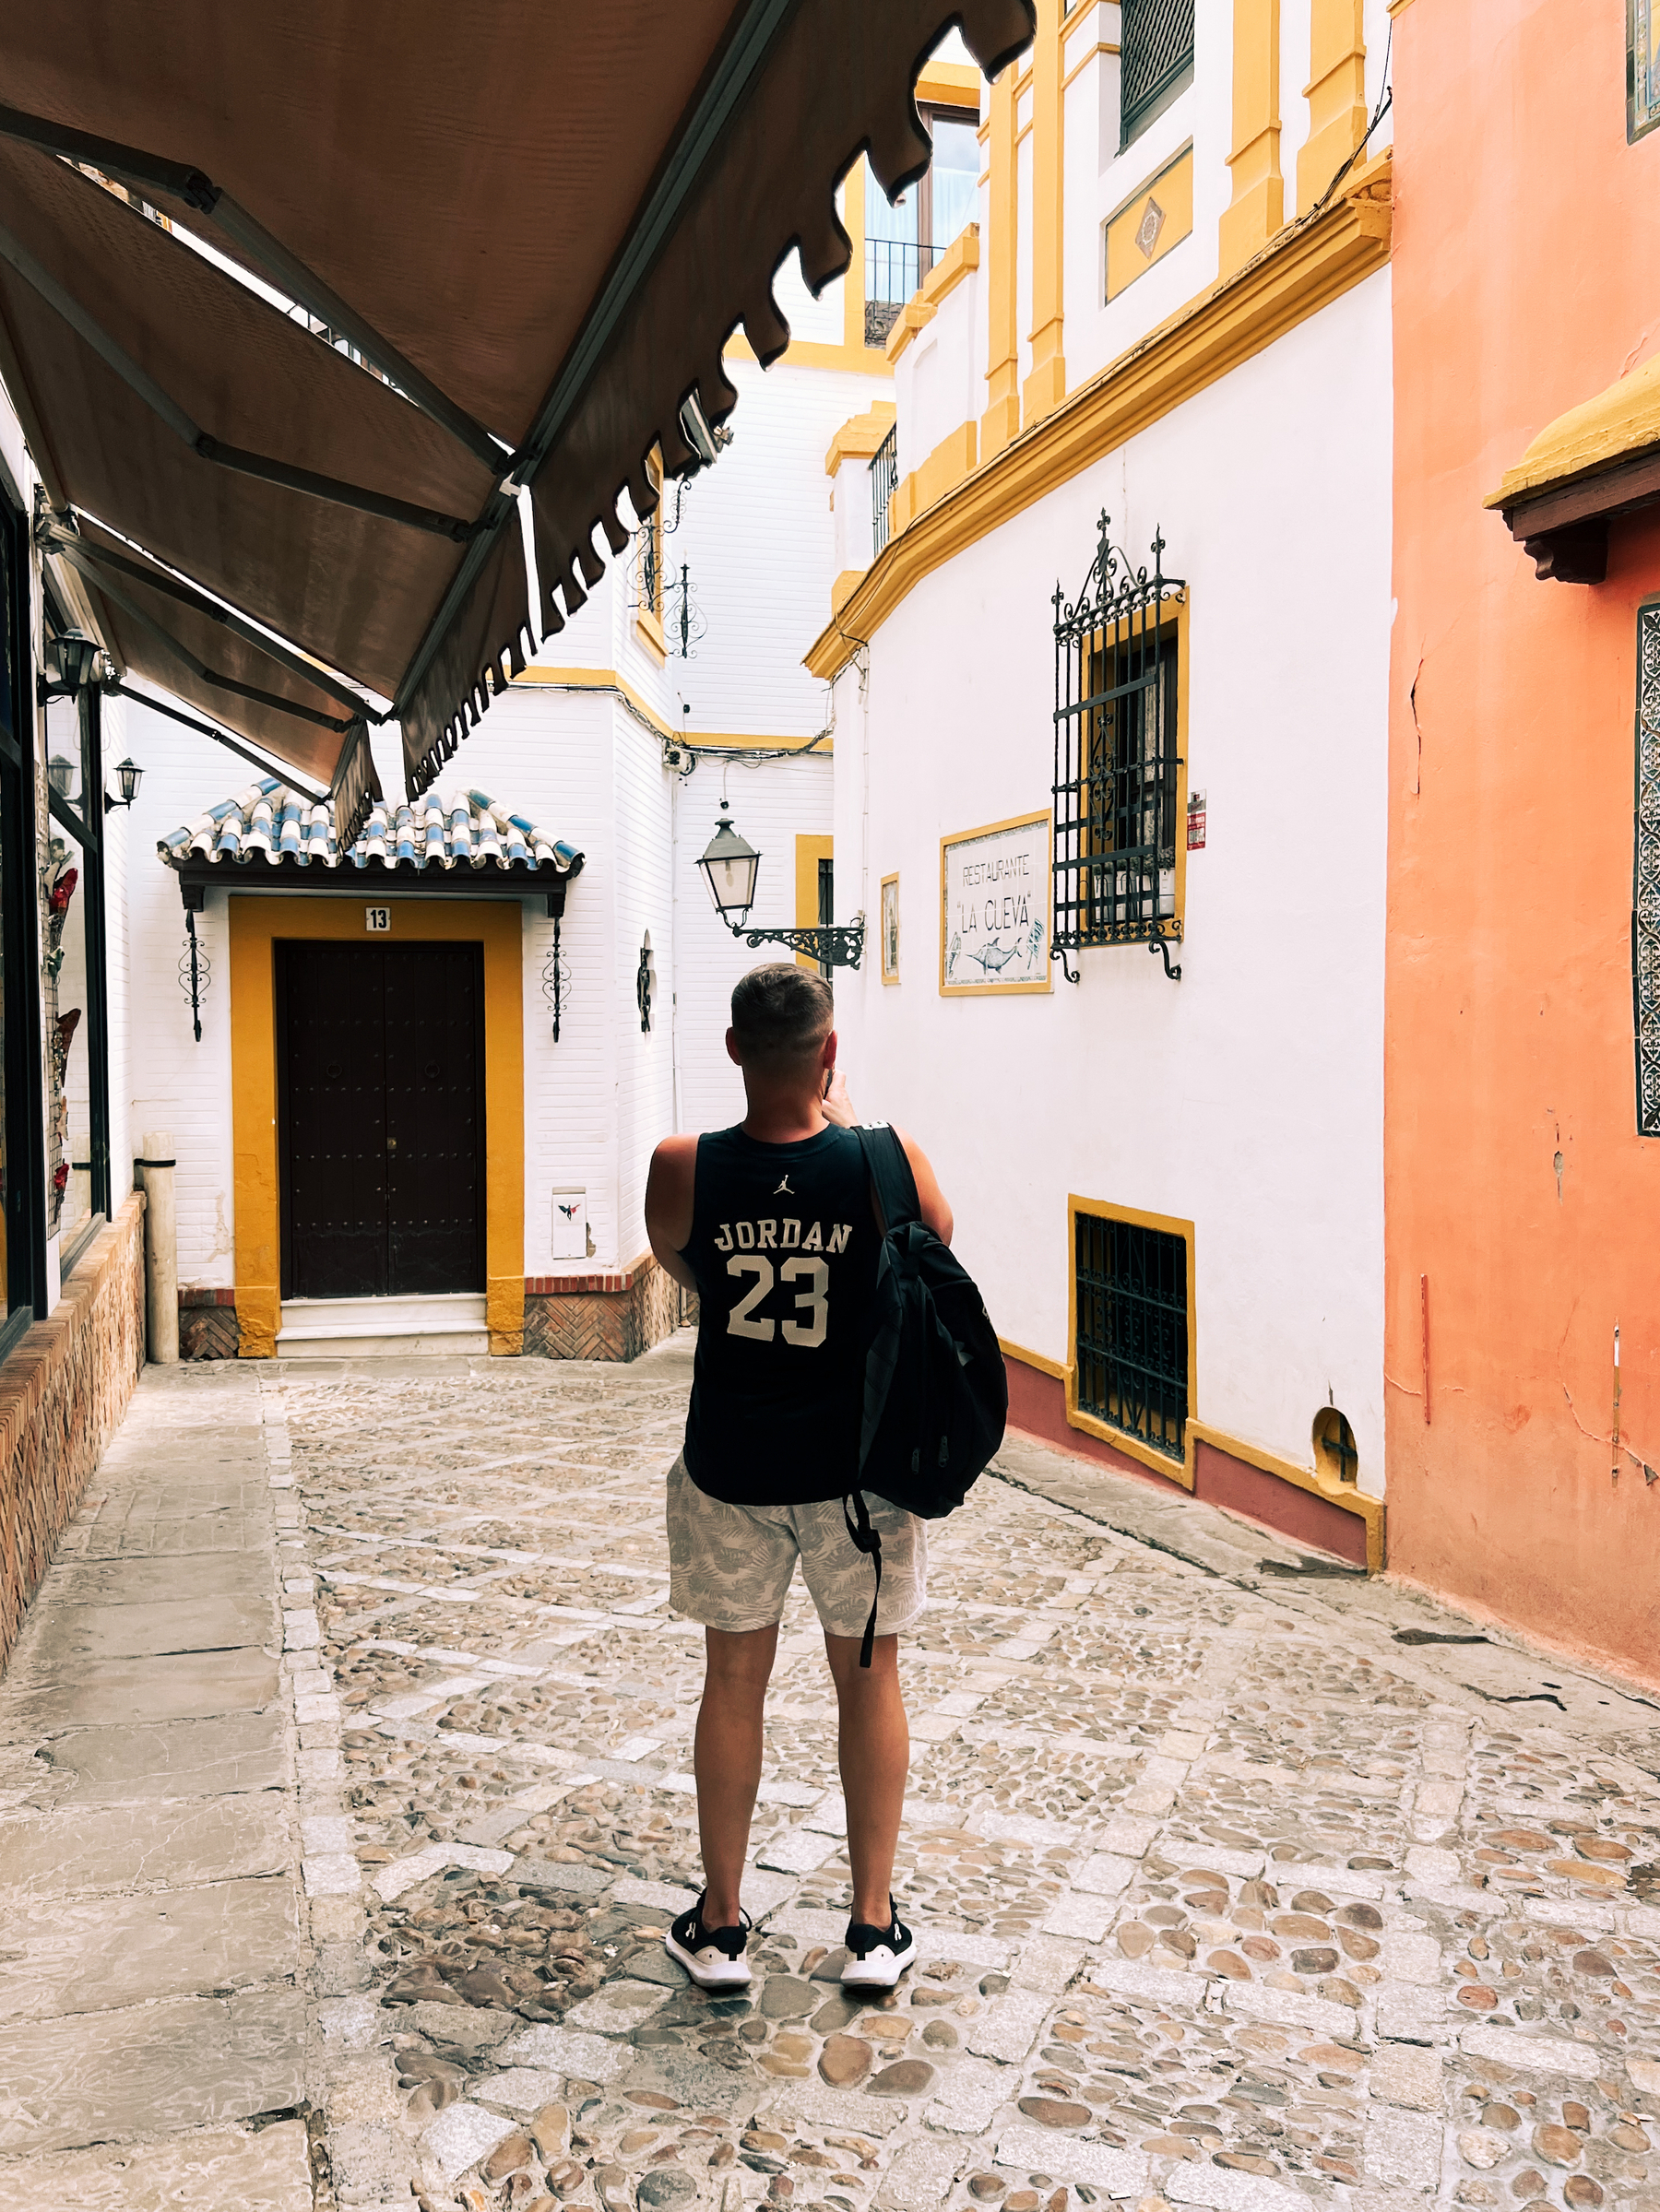 A tourist stops to take a photo in Santa Cruz, a classic neighborhood in Sevilla. Narrow streets and classic buildings. 